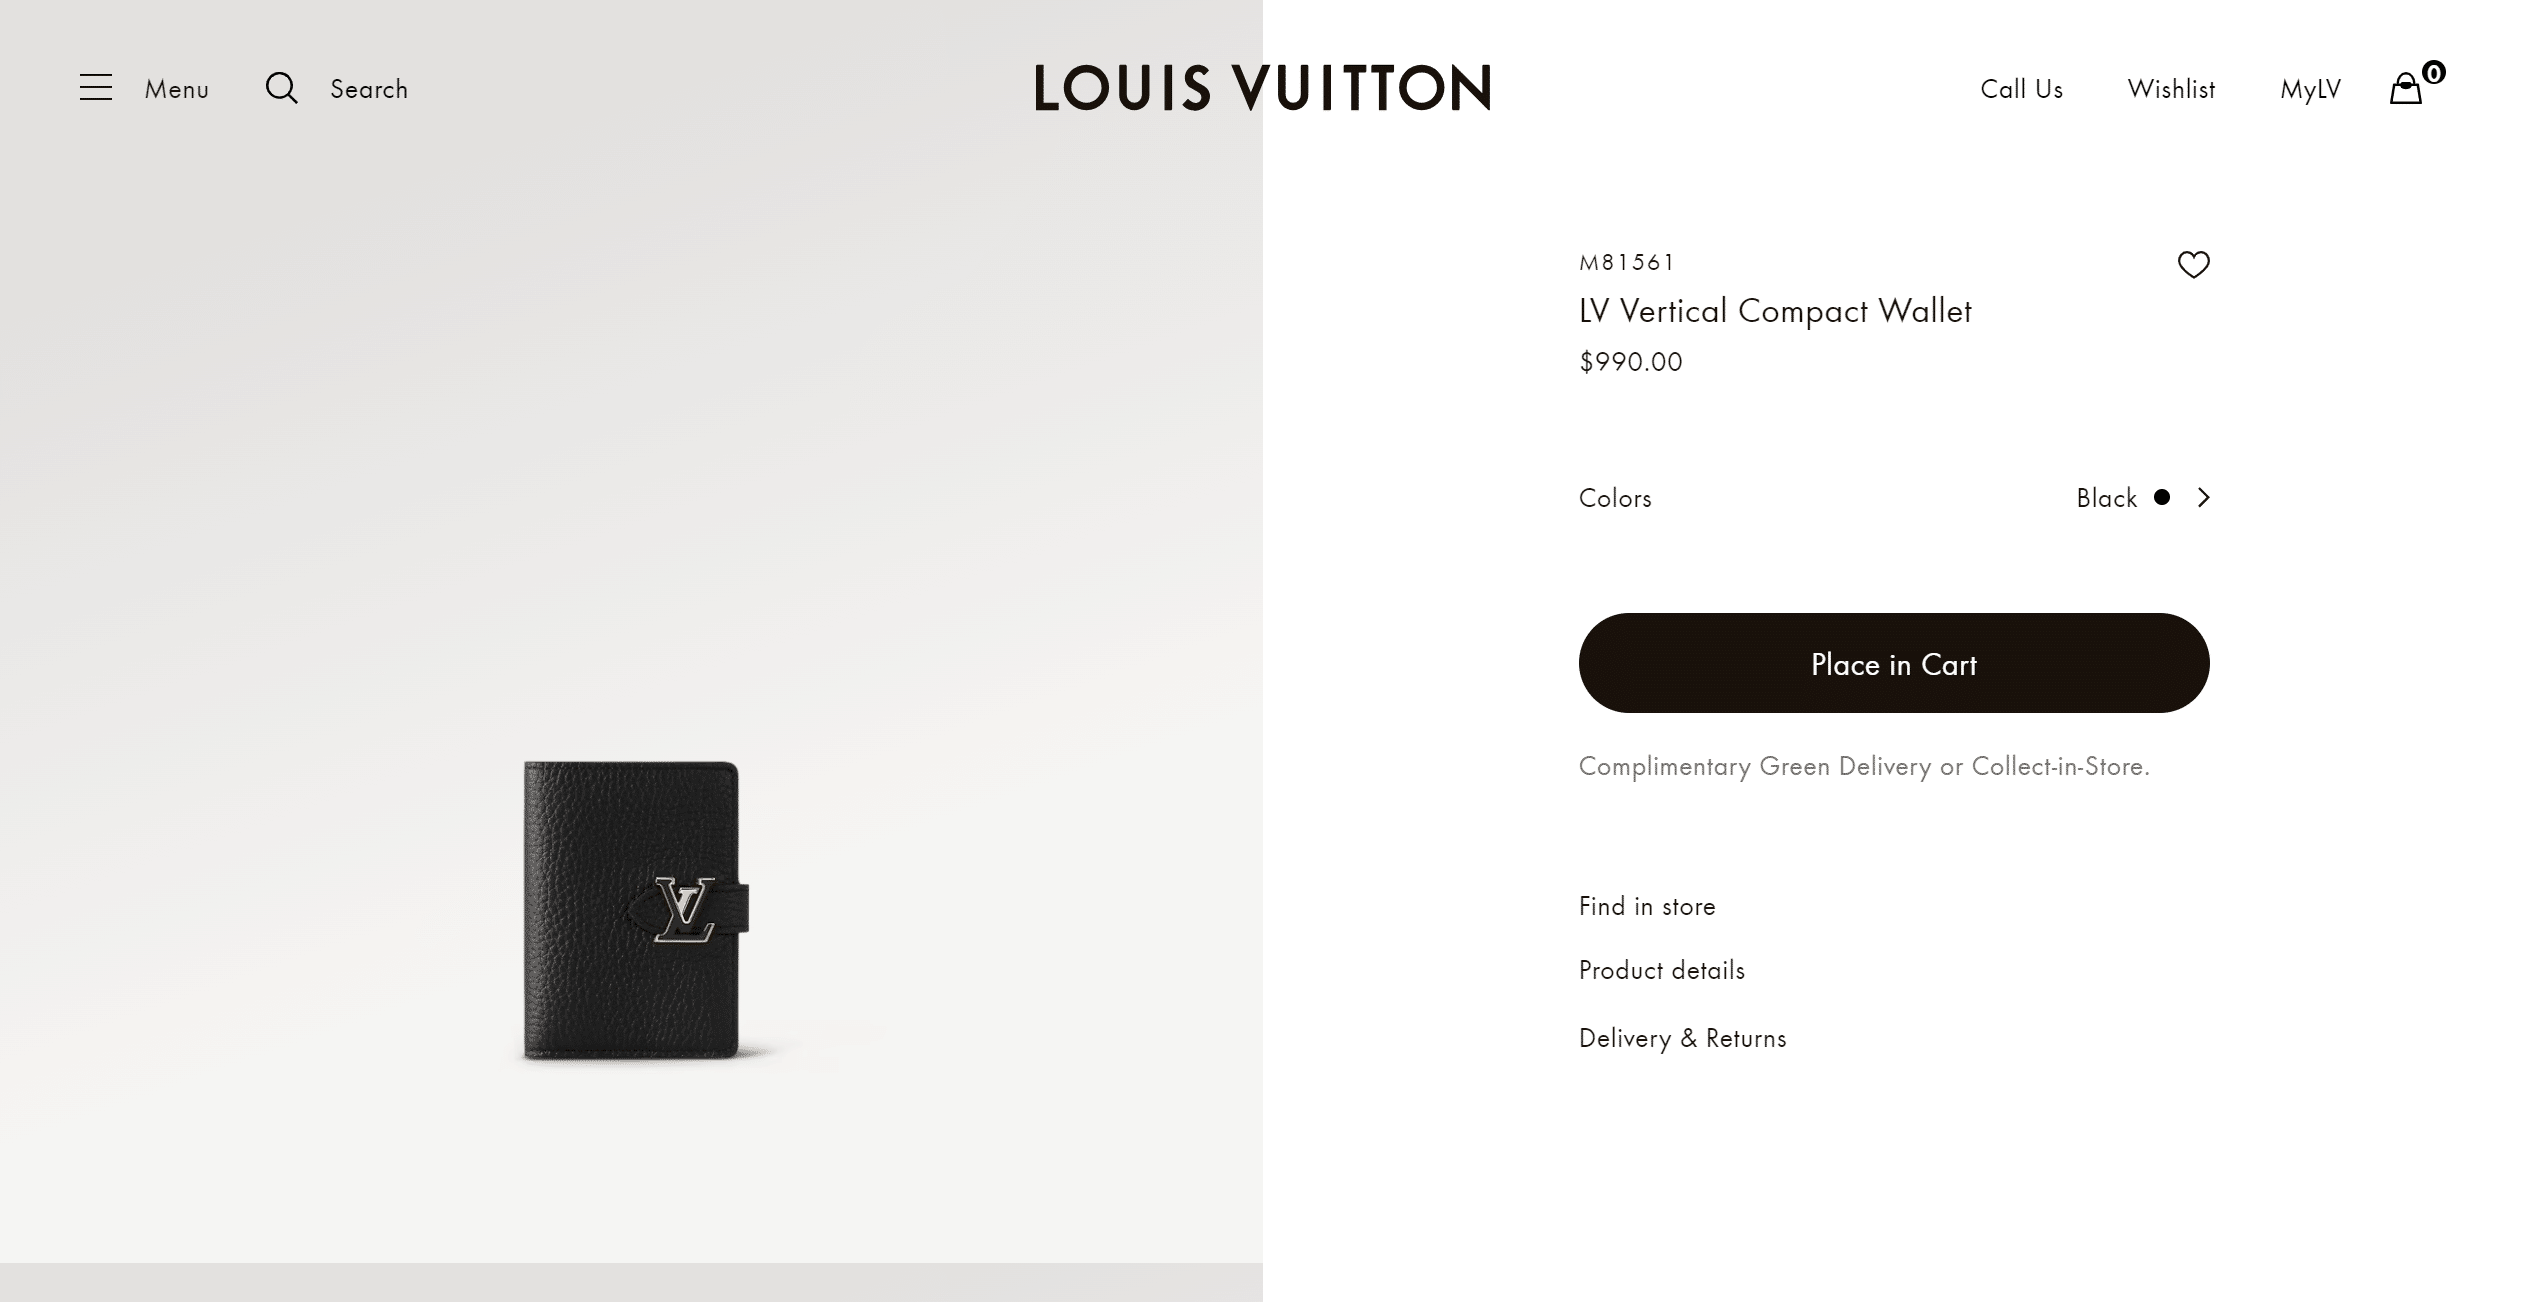 LV-Vertical-Compact-Wallet-Capucines-Women-Small-Leather-Goods-LOUIS-VUITTON-.png